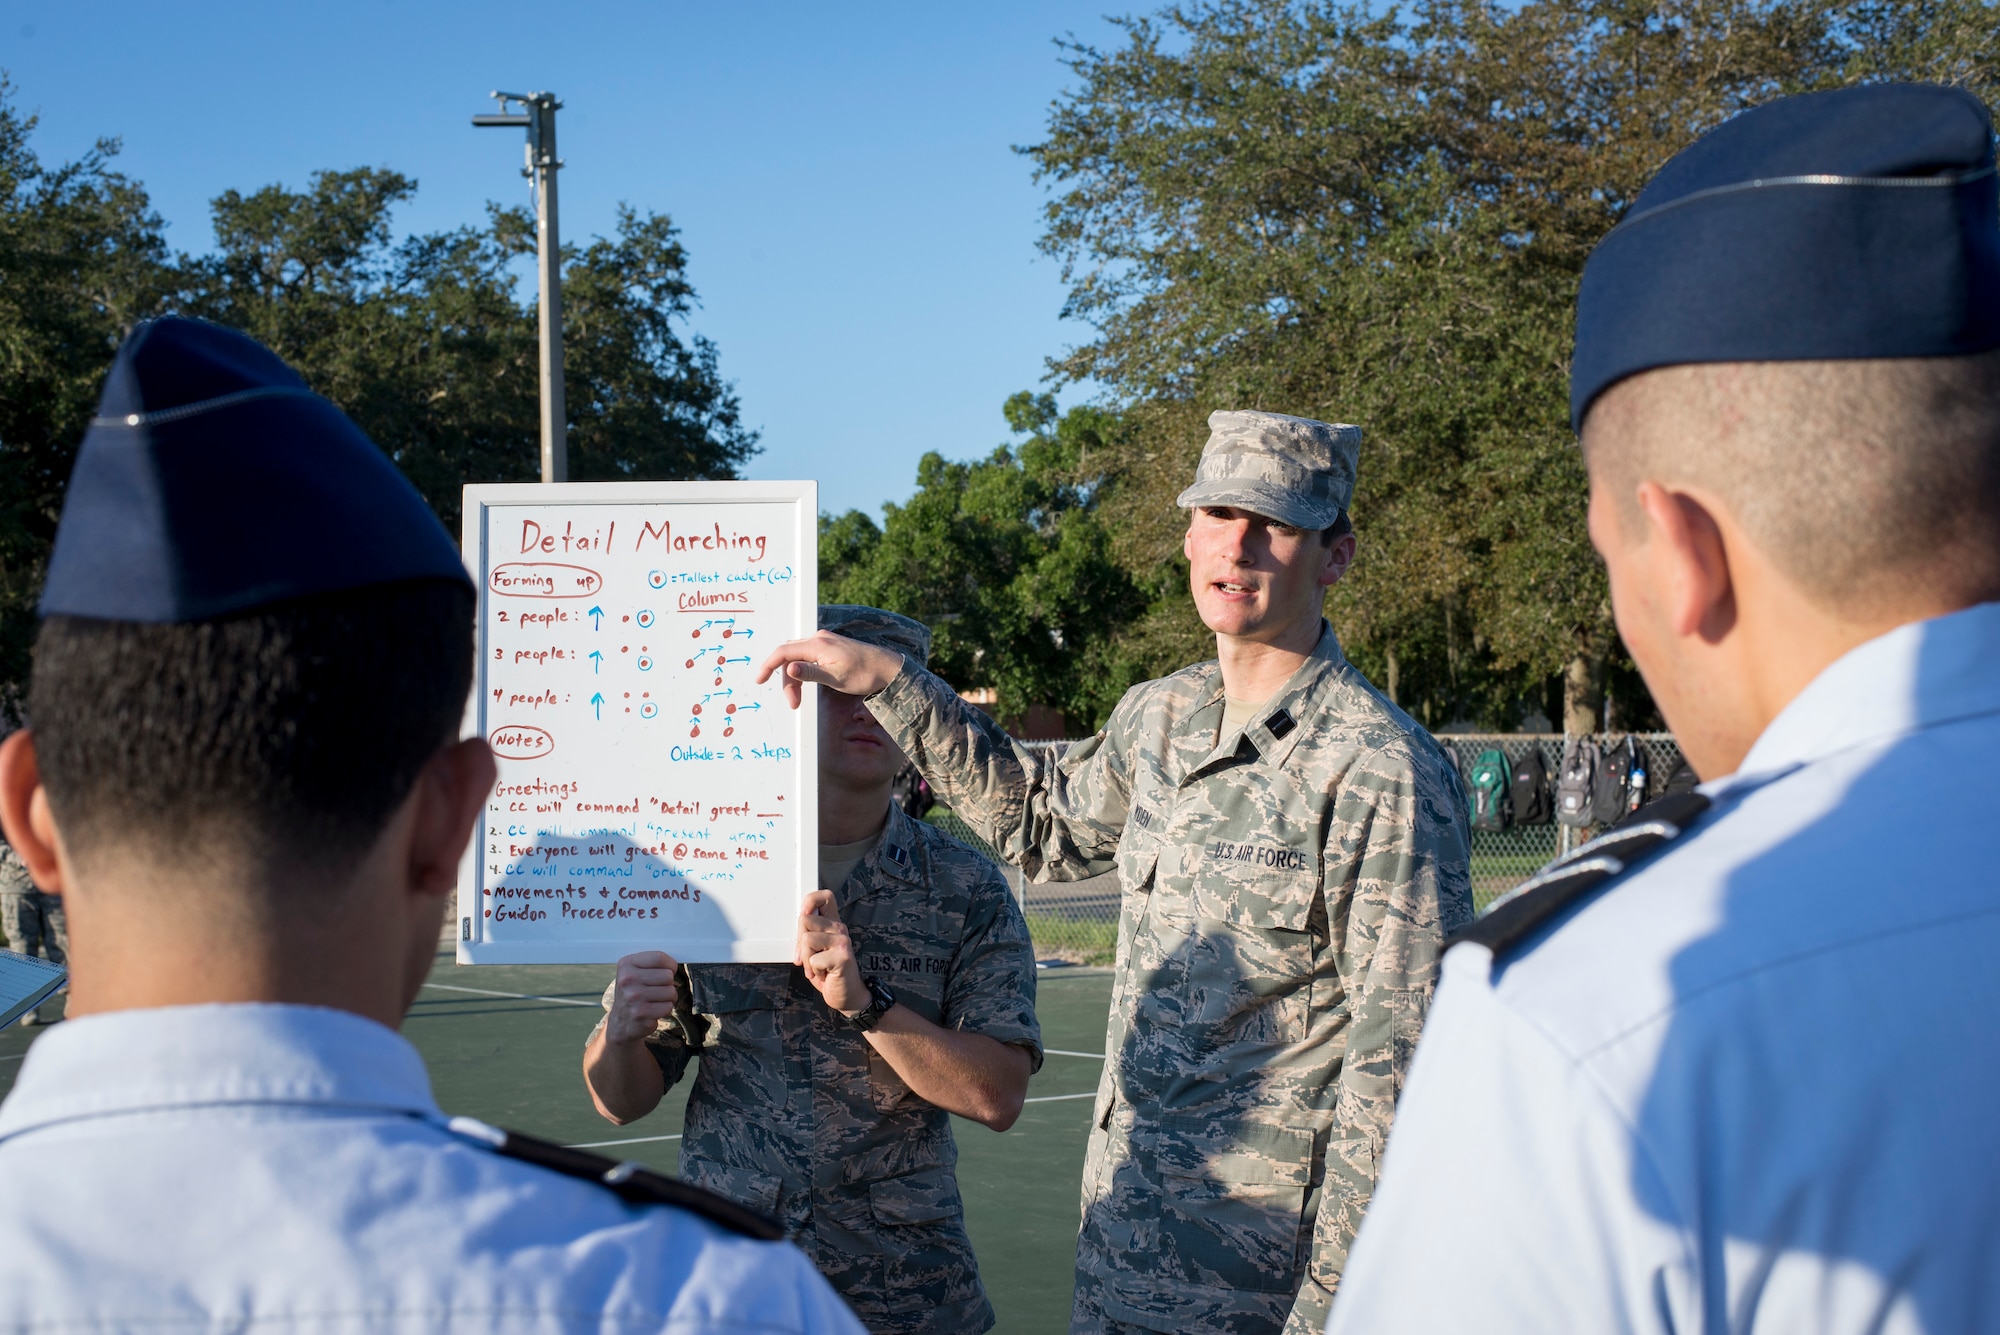 U.S. Air Force Reserve Officer Training Corps cadets from DET-158 at the University of Florida in Tampa, teach each other how to march in details on campus Sept. 20, 2018.